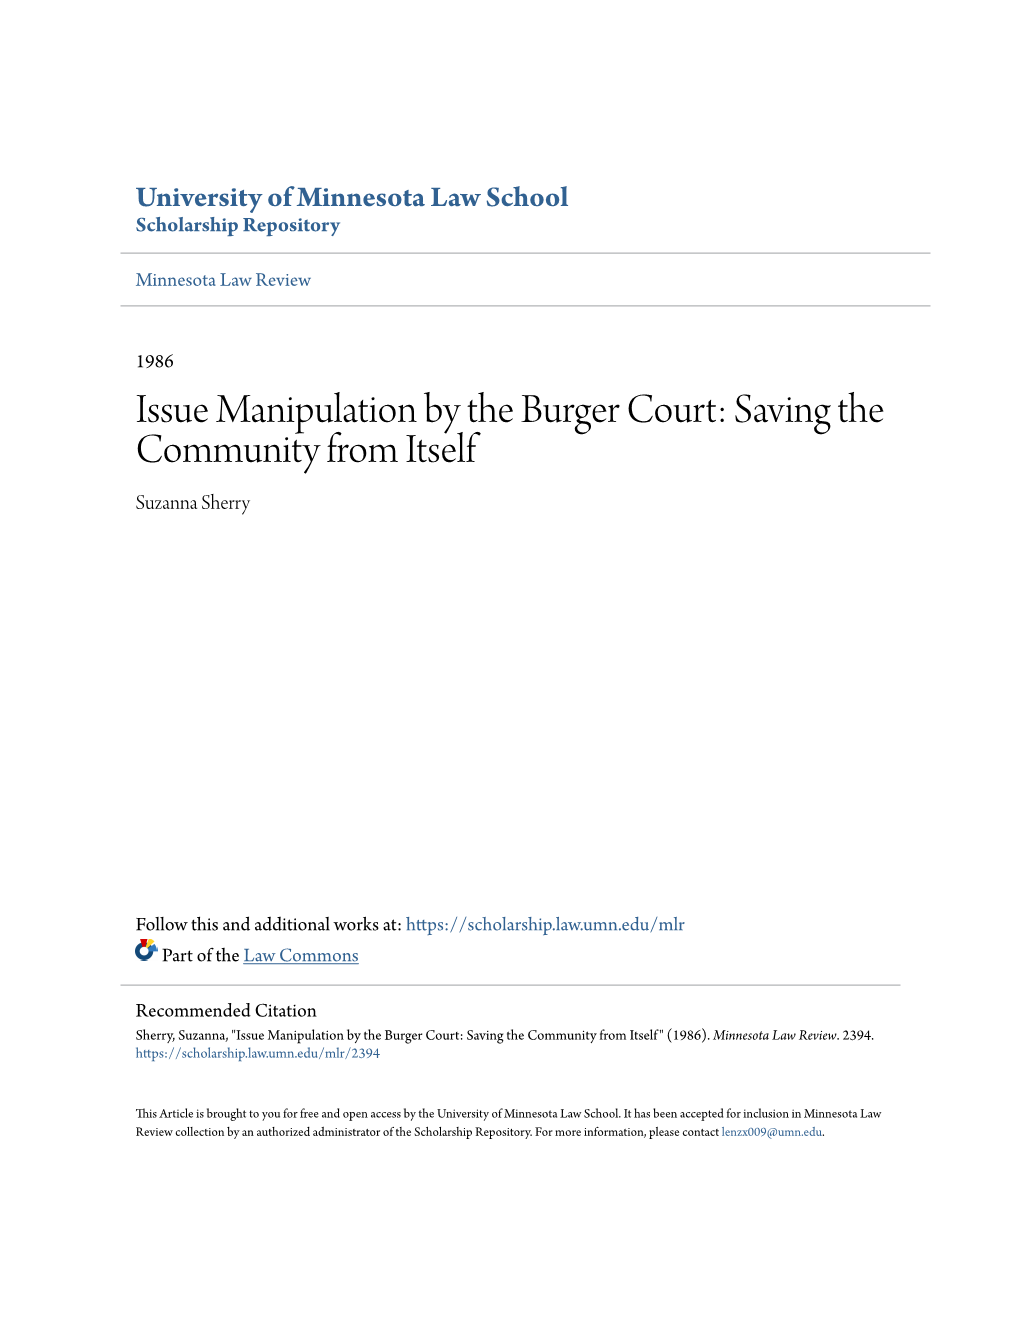 Issue Manipulation by the Burger Court: Saving the Community from Itself Suzanna Sherry